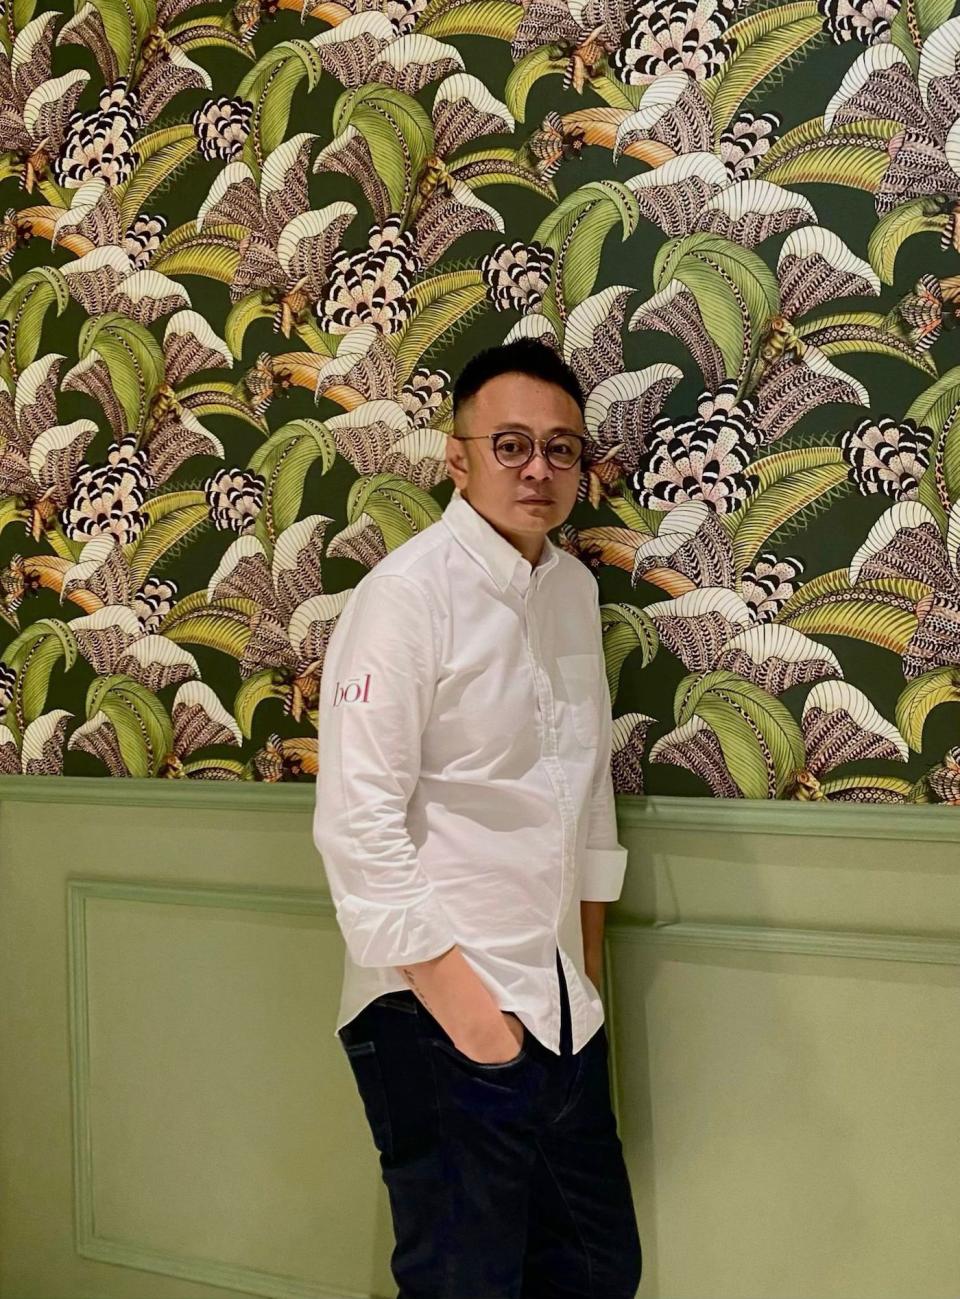  Kian Liew, executive chef and co-owner of the Kuala Lumpur restaurant Bol, celebrated for its contemporary Peranakan cuisine